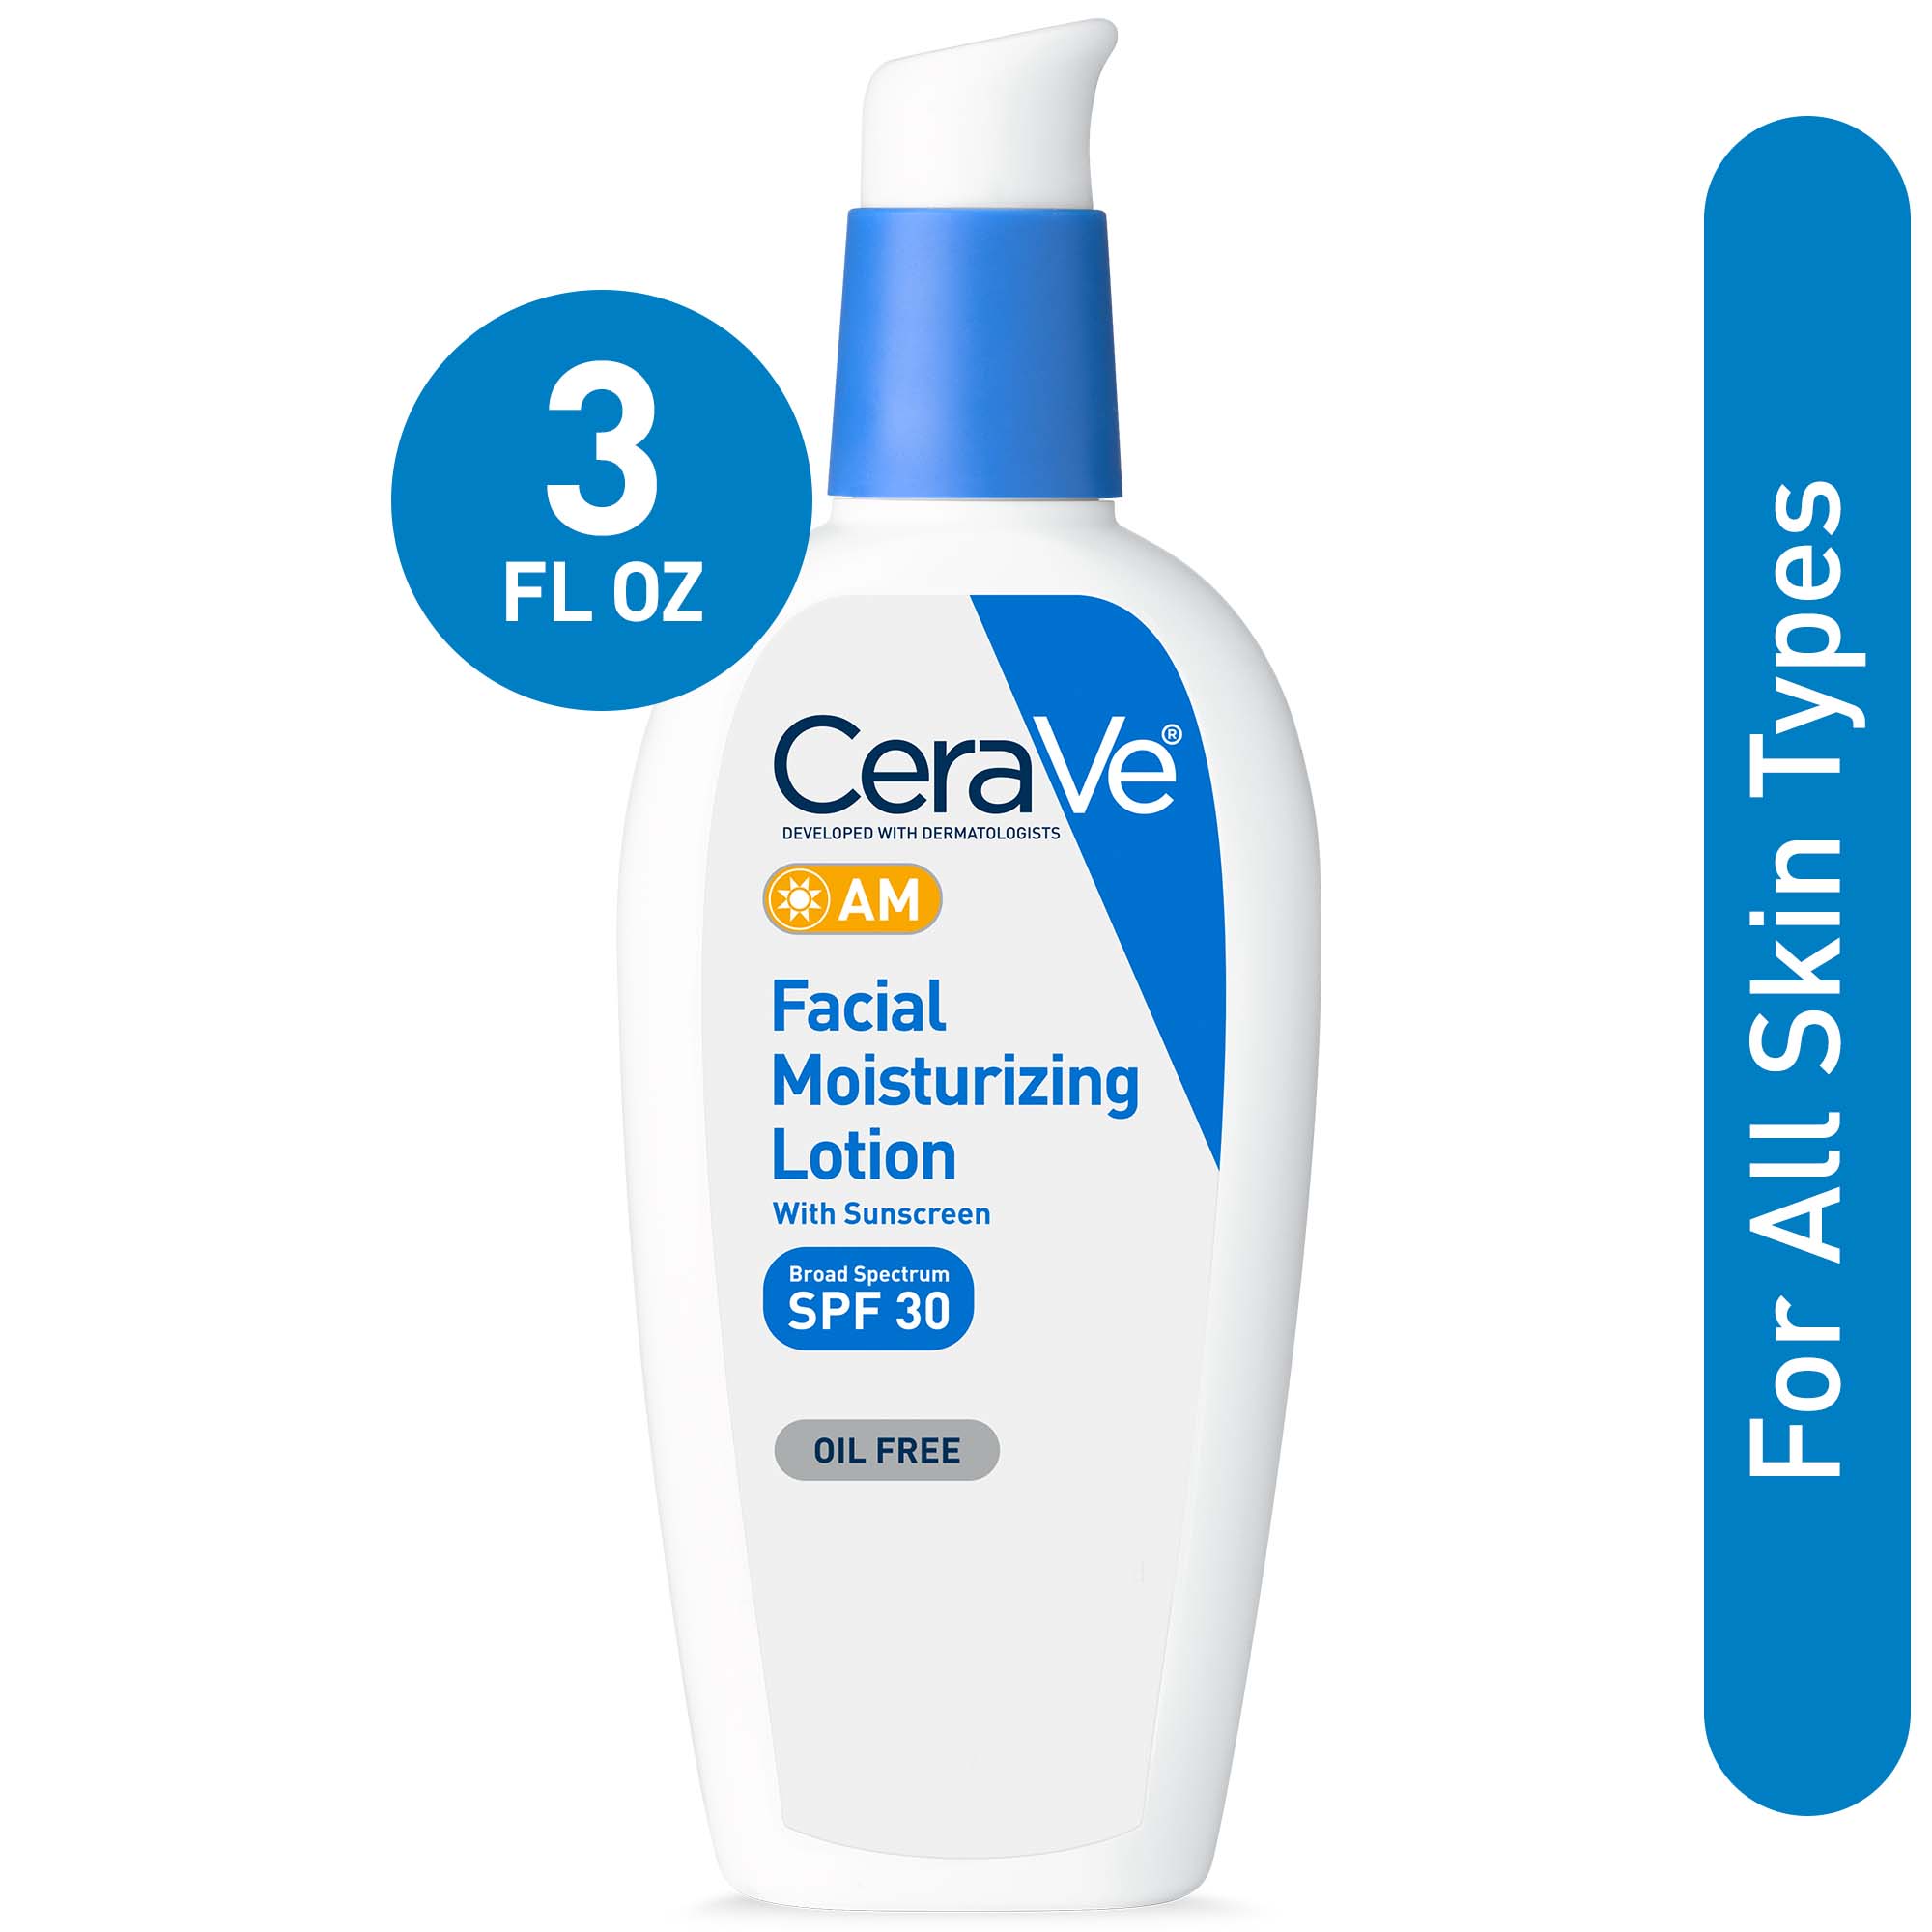 CeraVe AM Face Moisturizer Lotion with Sunscreen SPF 30 for Normal to Oily Skin, 3 fl oz - image 1 of 12